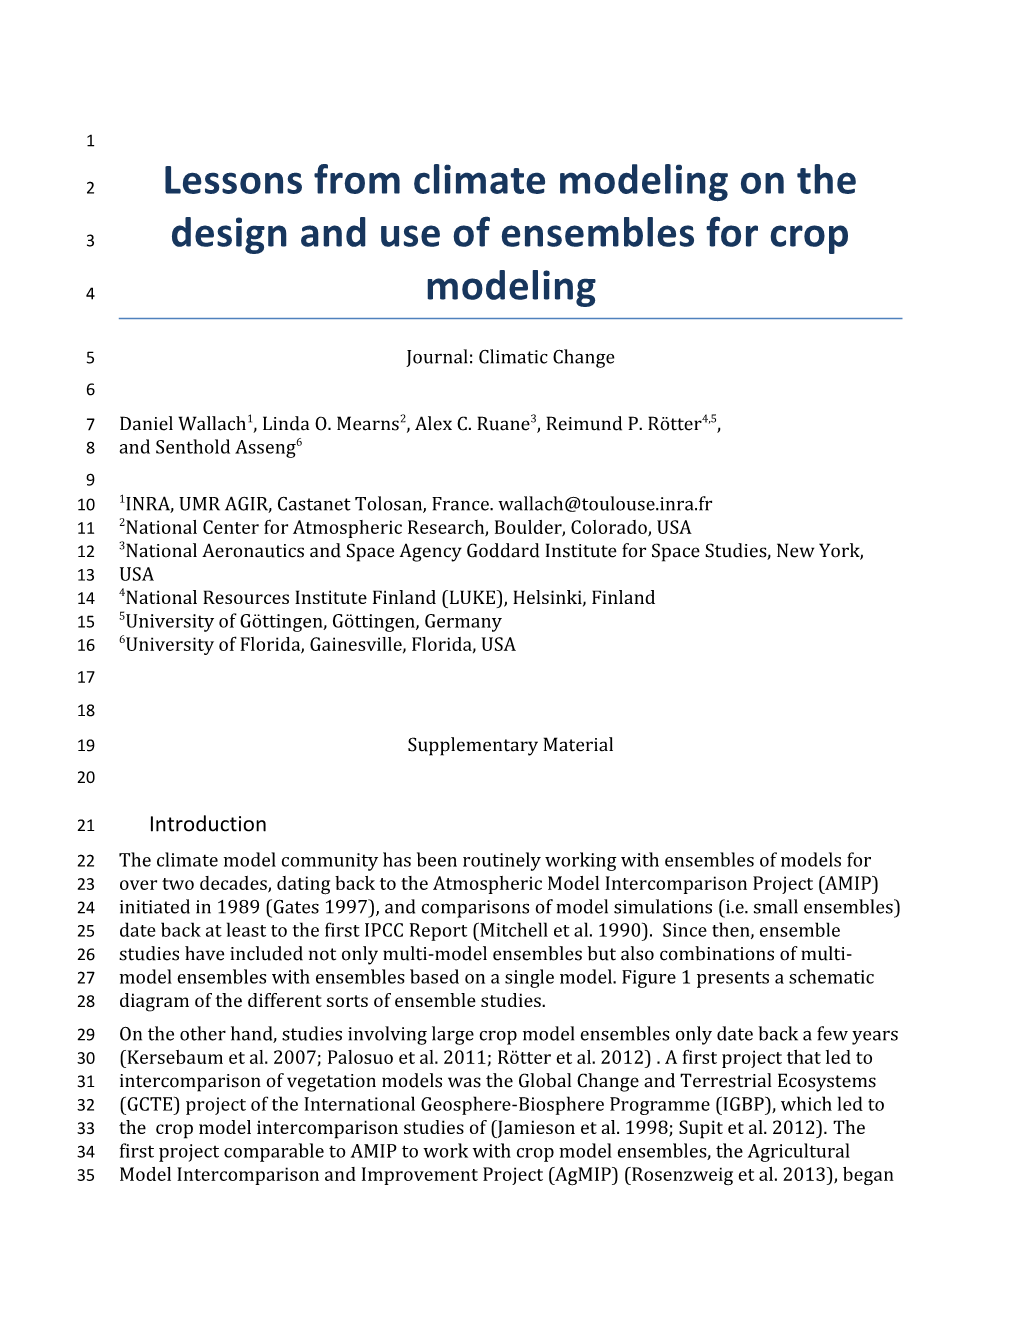 Lessons from Climate Modeling on the Design and Use of Ensembles for Crop Modeling